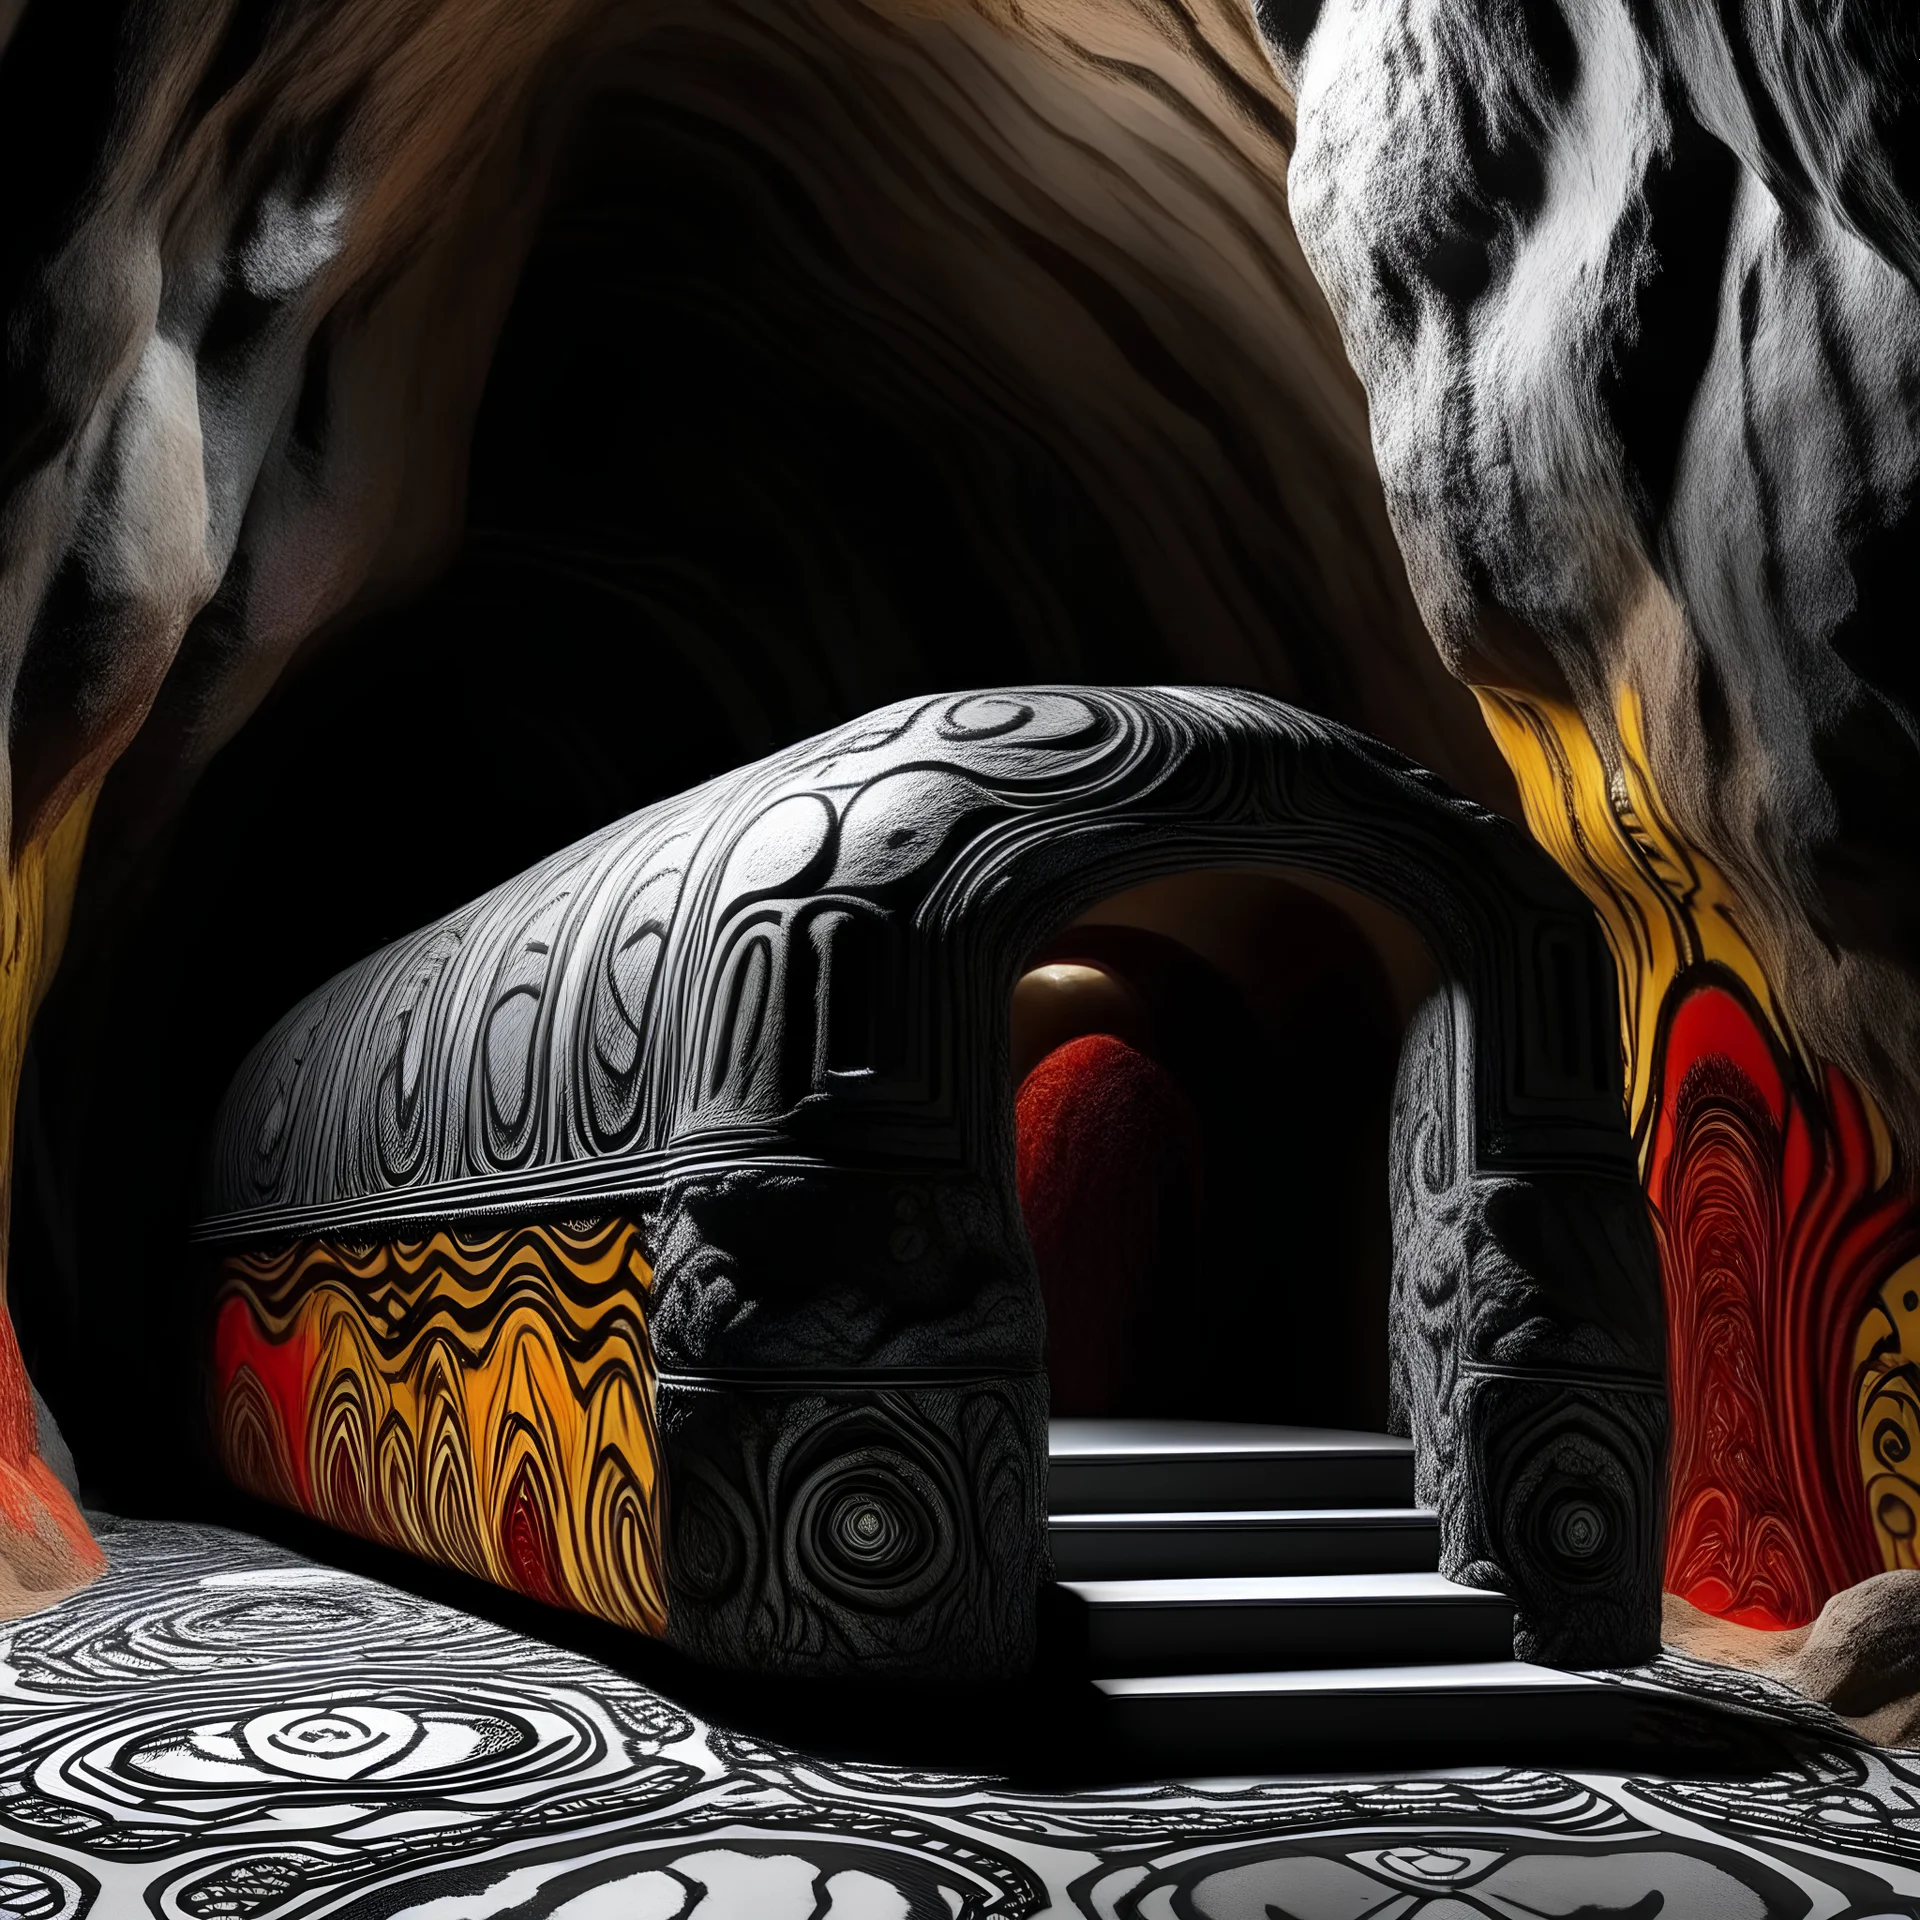 A gray train in a cavern filled with lava designed in Mehndi design painted by Stuart Davis